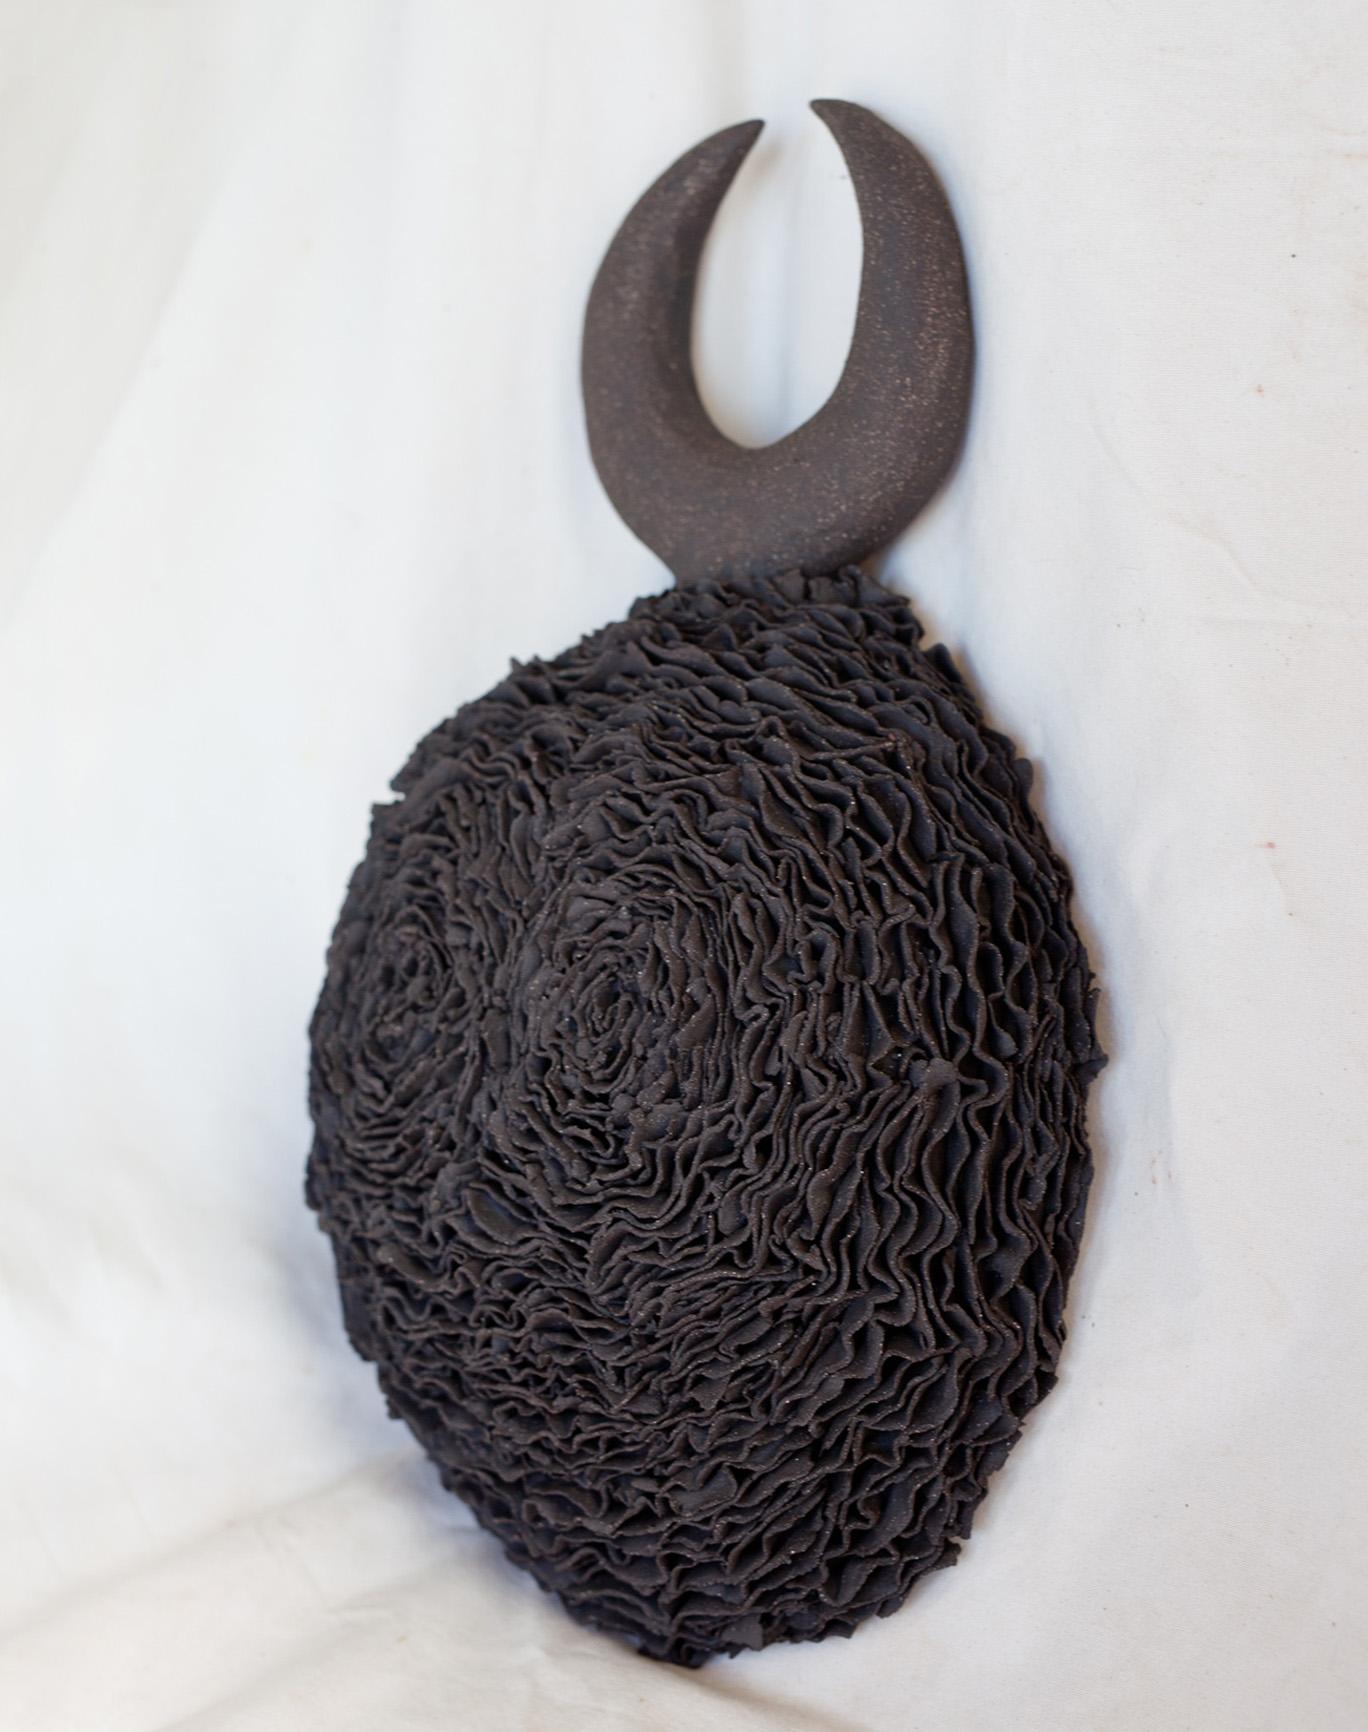 British Contemporary and Handcrafted, Shadow 5 Ceramic Wall Mask by Noe Kuremoto For Sale